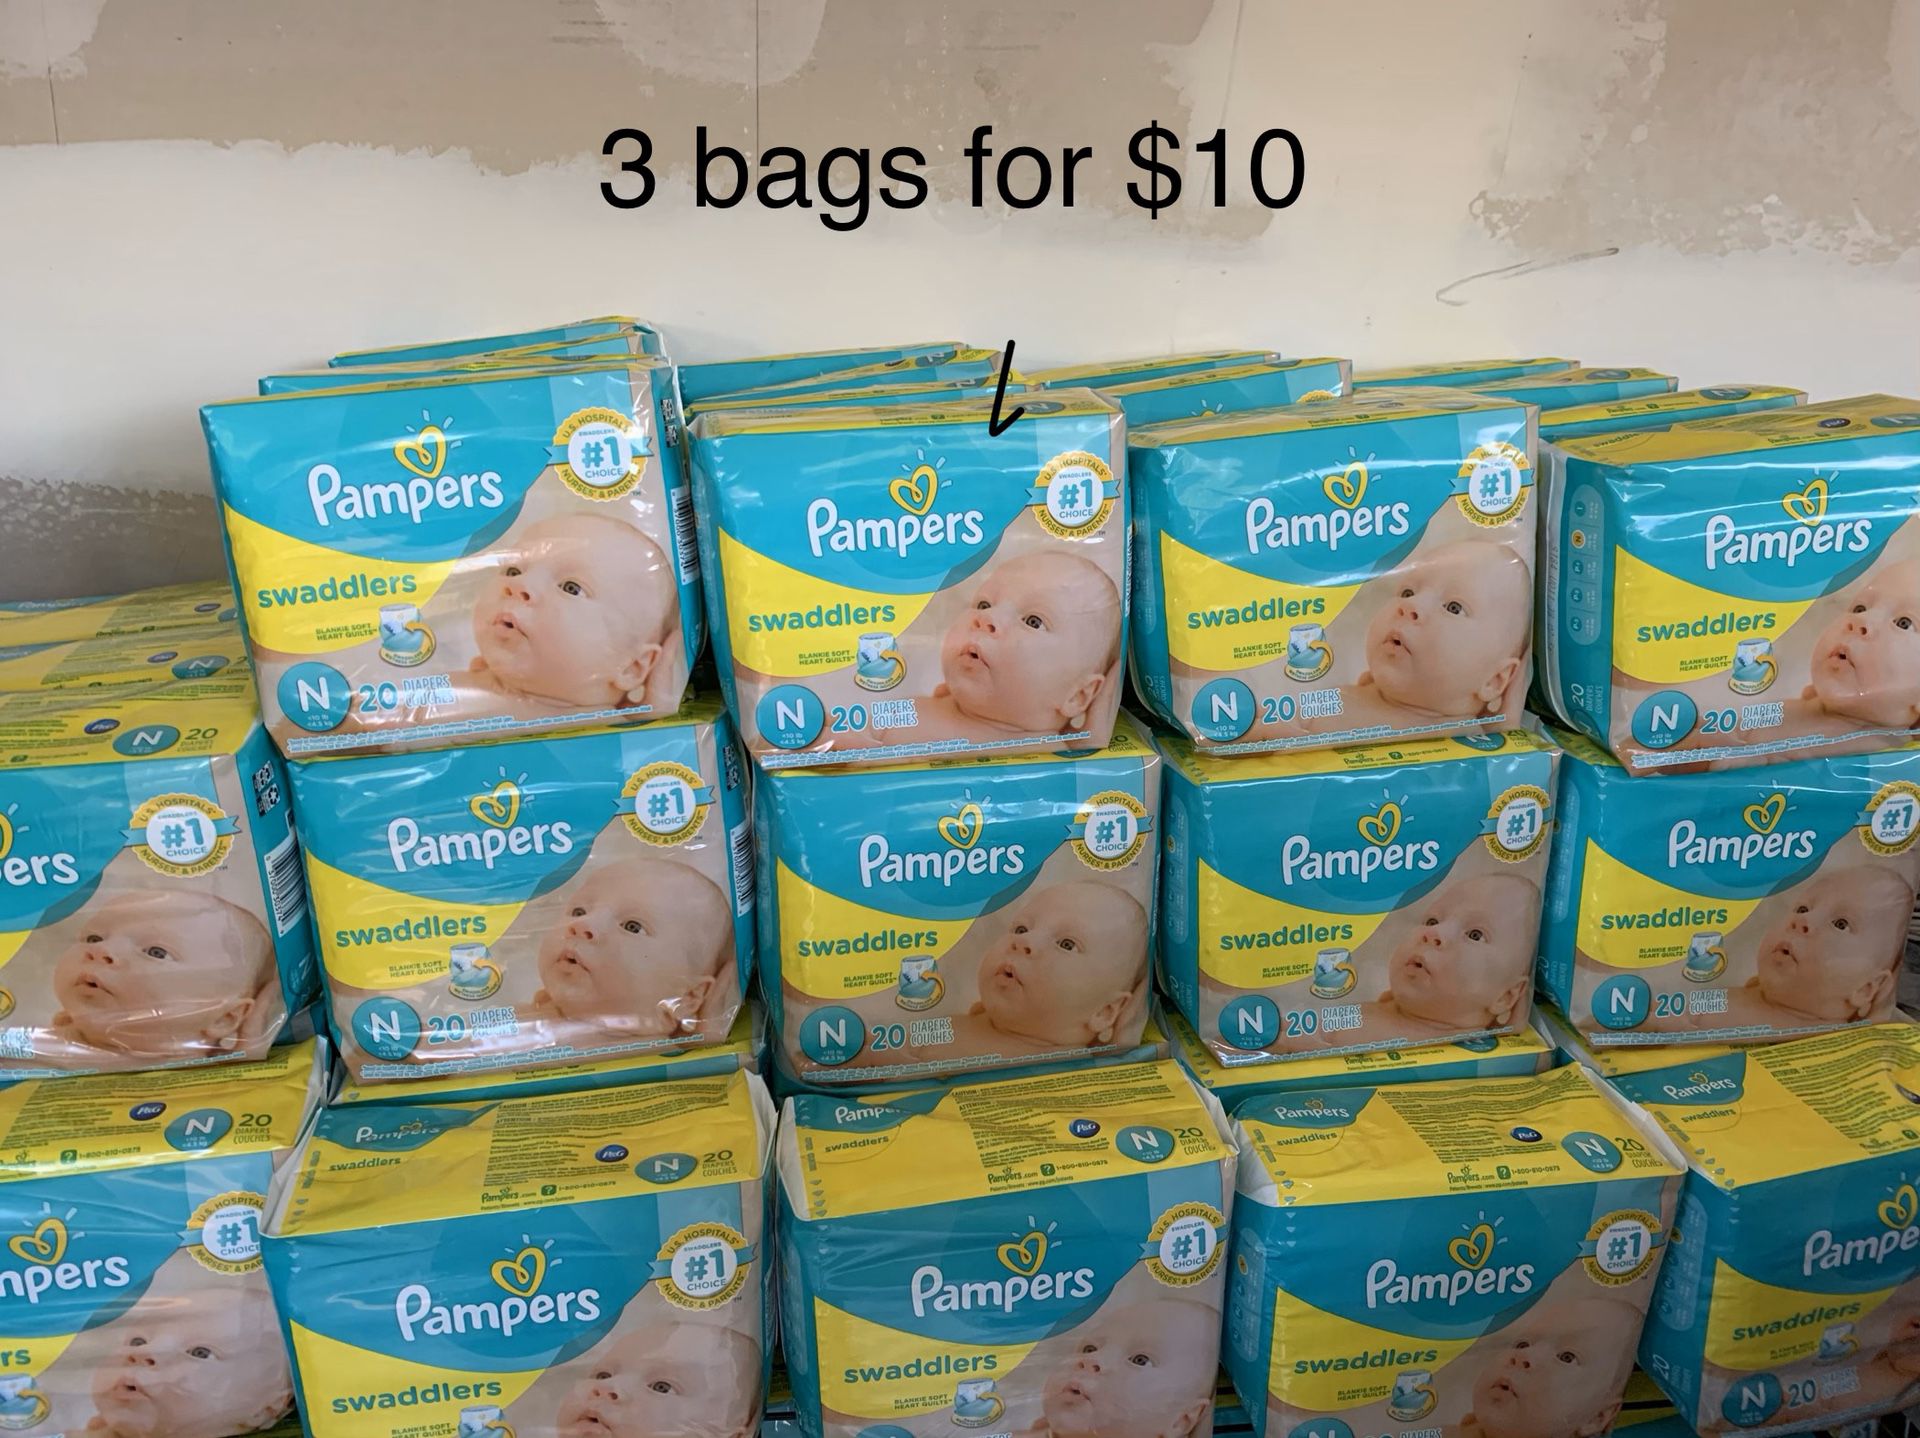 Pampers NEWBORN diapers 3 bags for $10